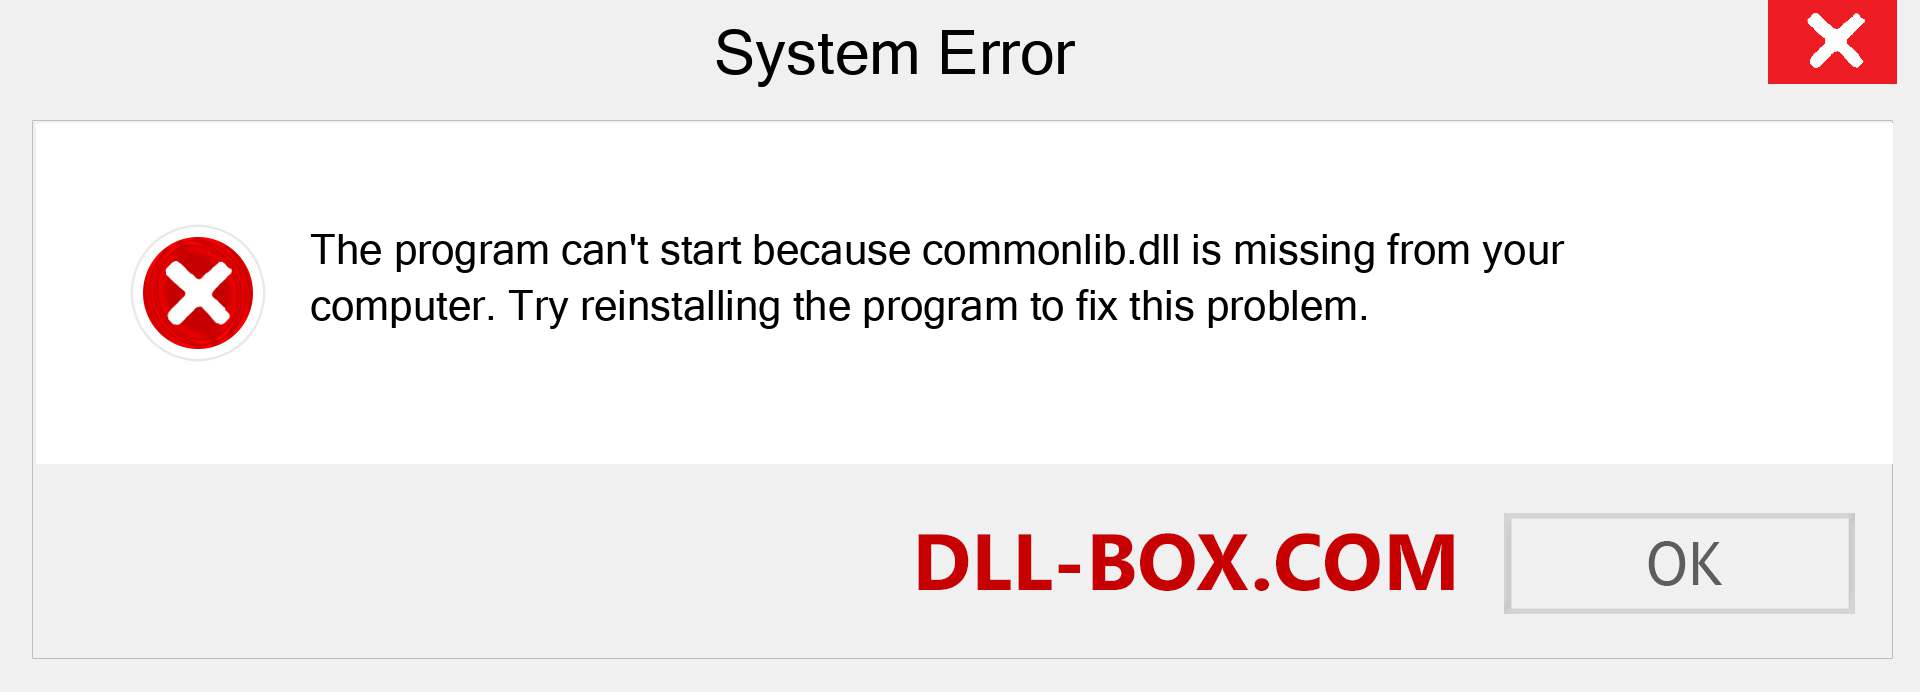  commonlib.dll file is missing?. Download for Windows 7, 8, 10 - Fix  commonlib dll Missing Error on Windows, photos, images